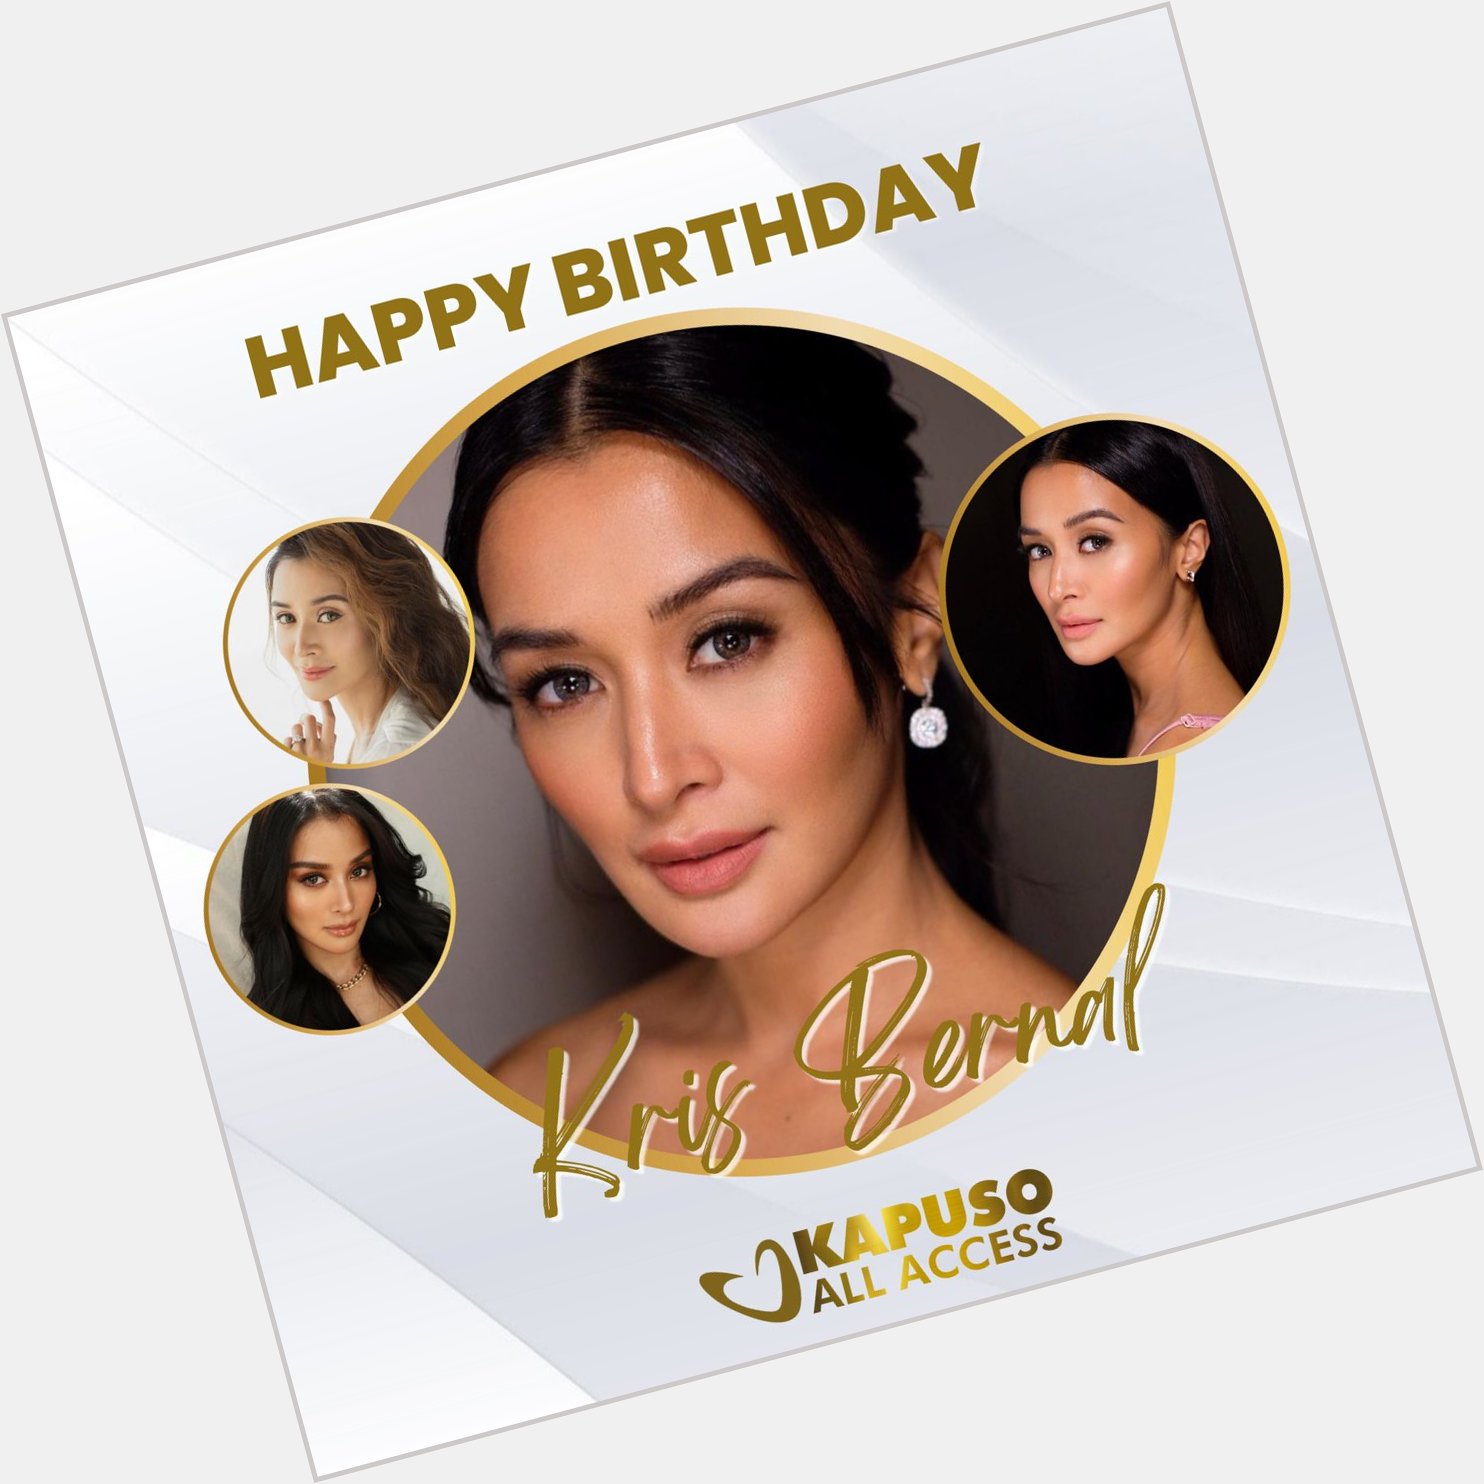 Happy birthday, Kris Bernal ( Wishing you good health, happiness, and more success.  